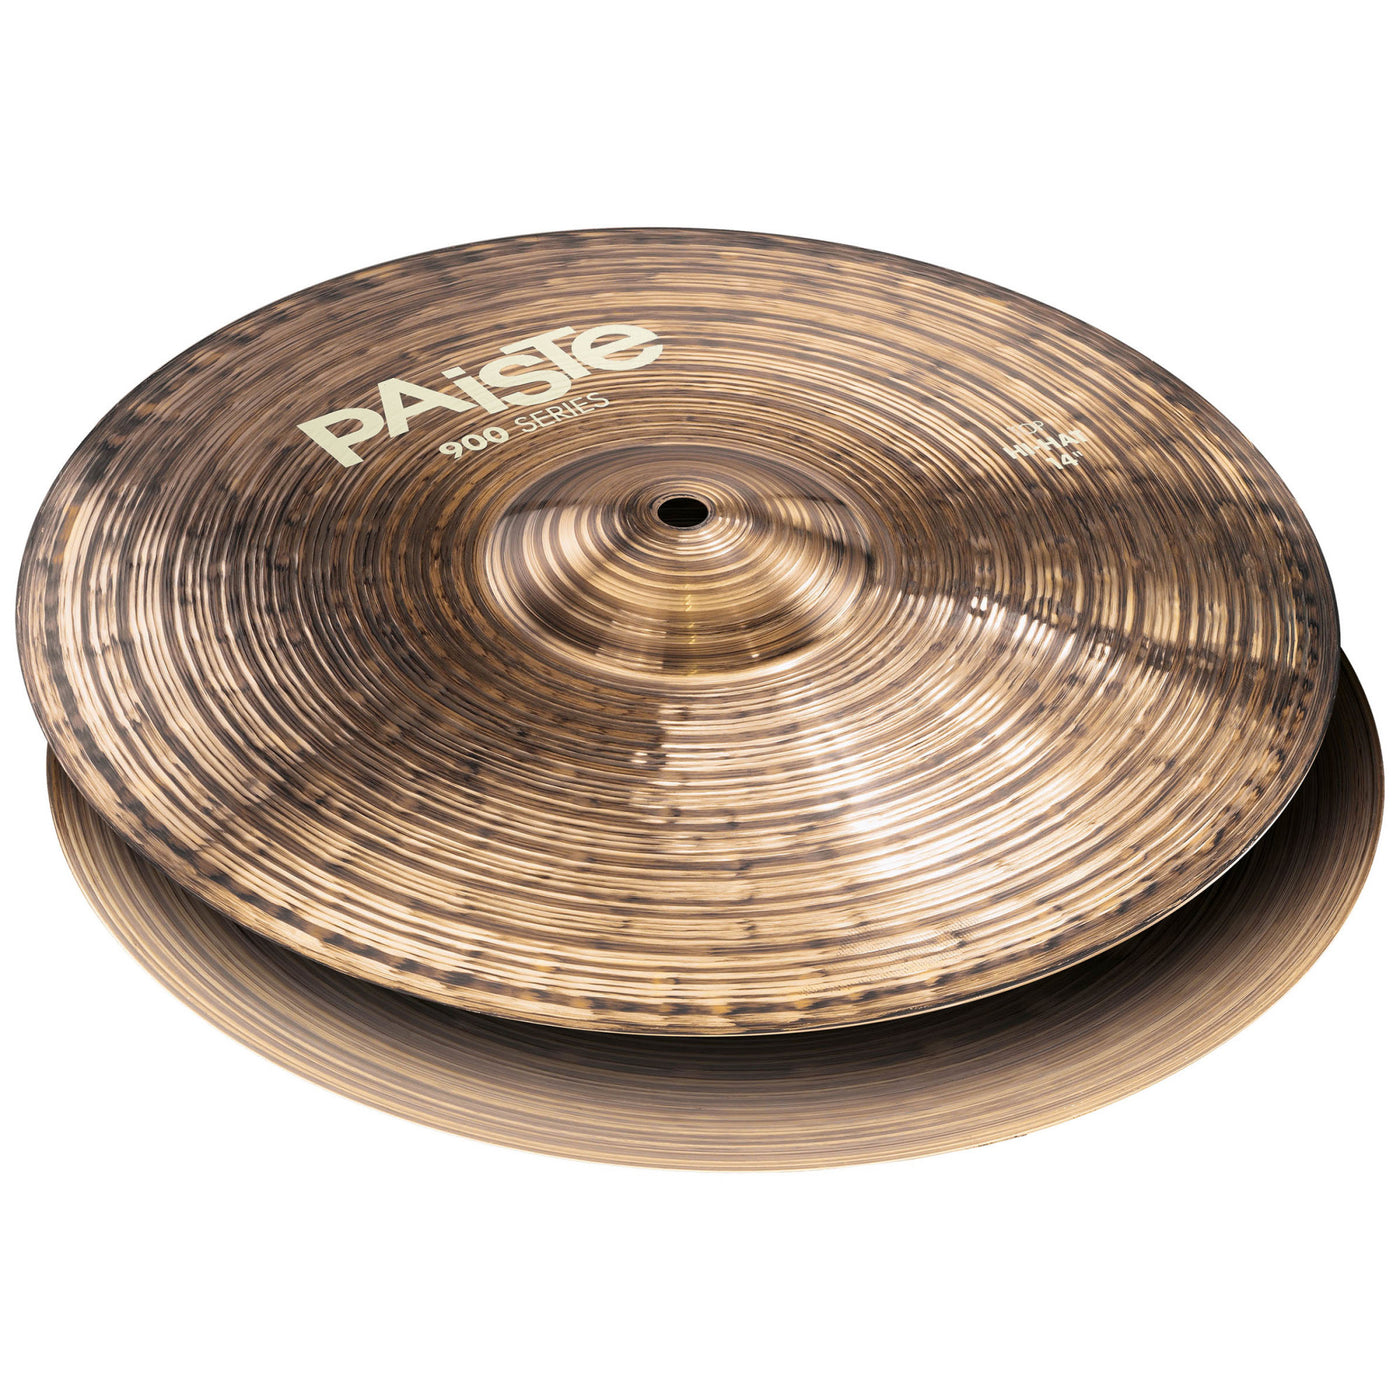 Paiste Hi-Hat Cymbals, 900 Series, Percussion Instrument for Drums, 14"